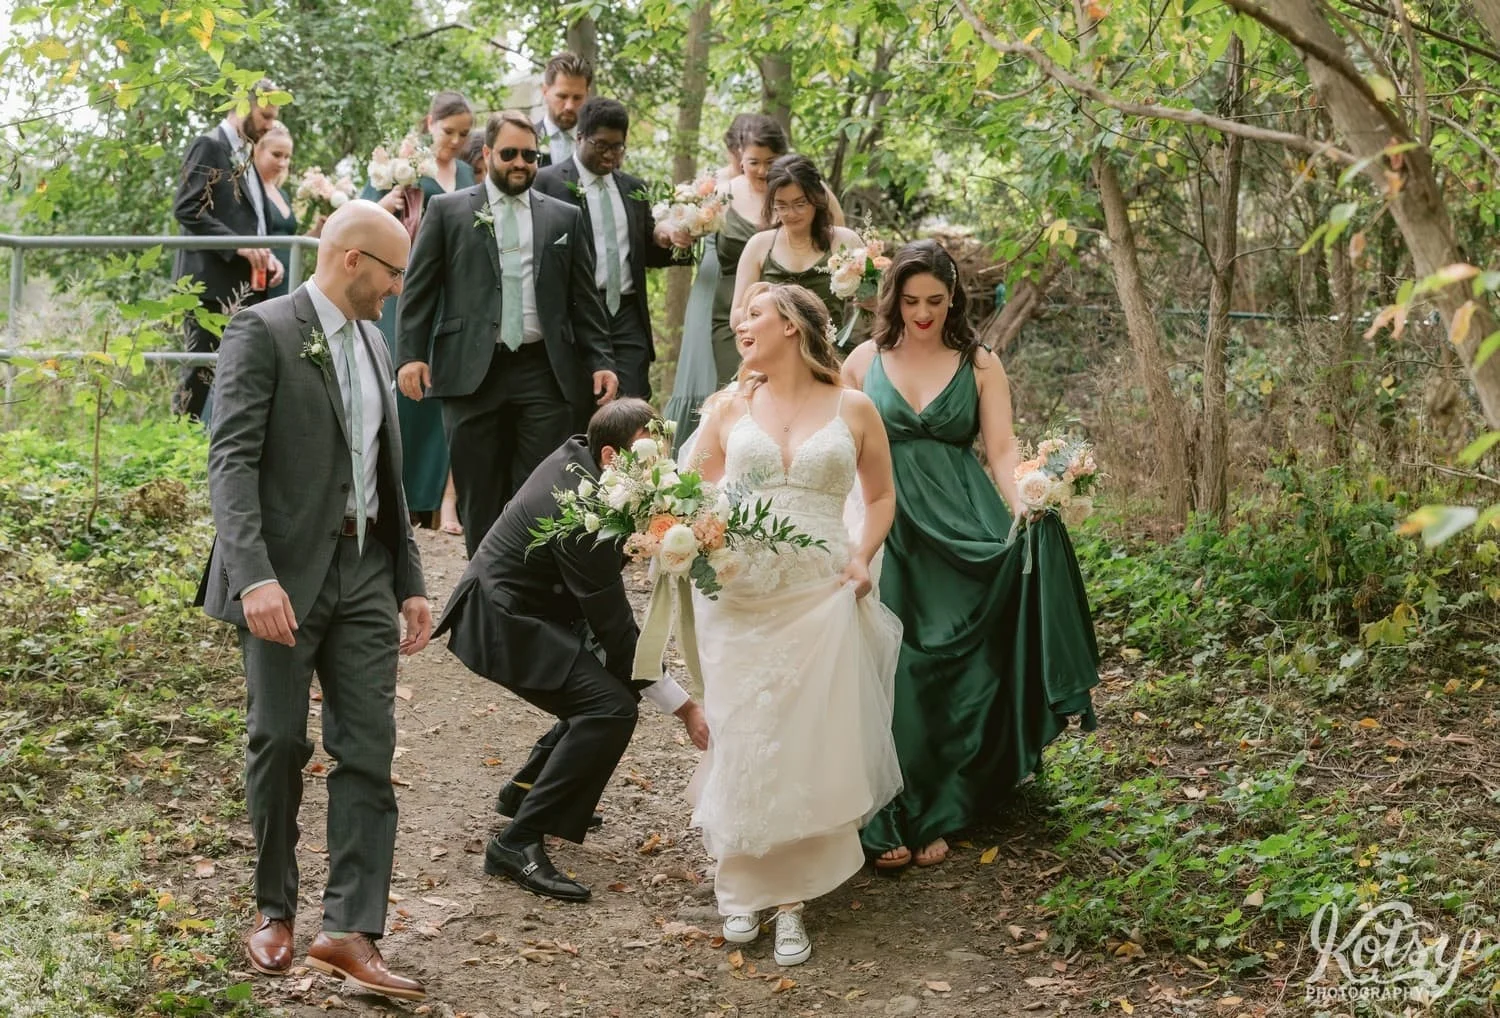 A bride and a white bridal Gown holding a flower bouquet lets out a big laugh as she walks down a dirt path with her groom and wedding party at West Deane Park in Toronto, Canada